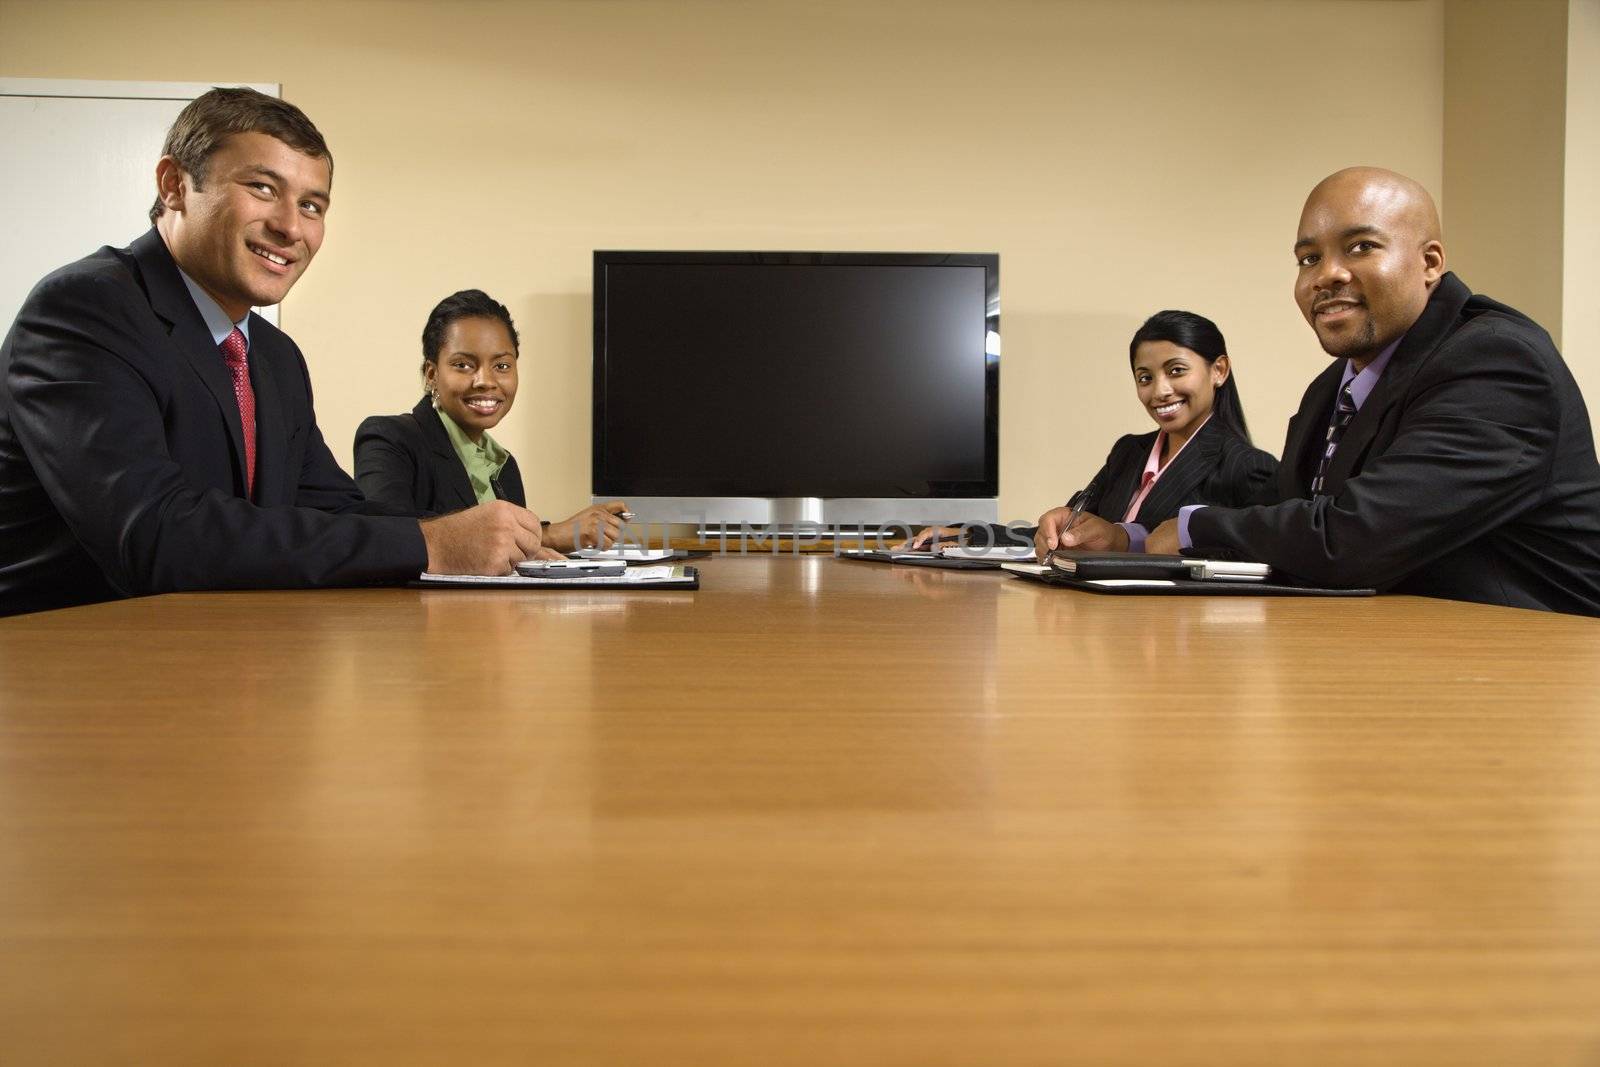 Businesspeople sitting at conference table smiling with flat screen display in background.